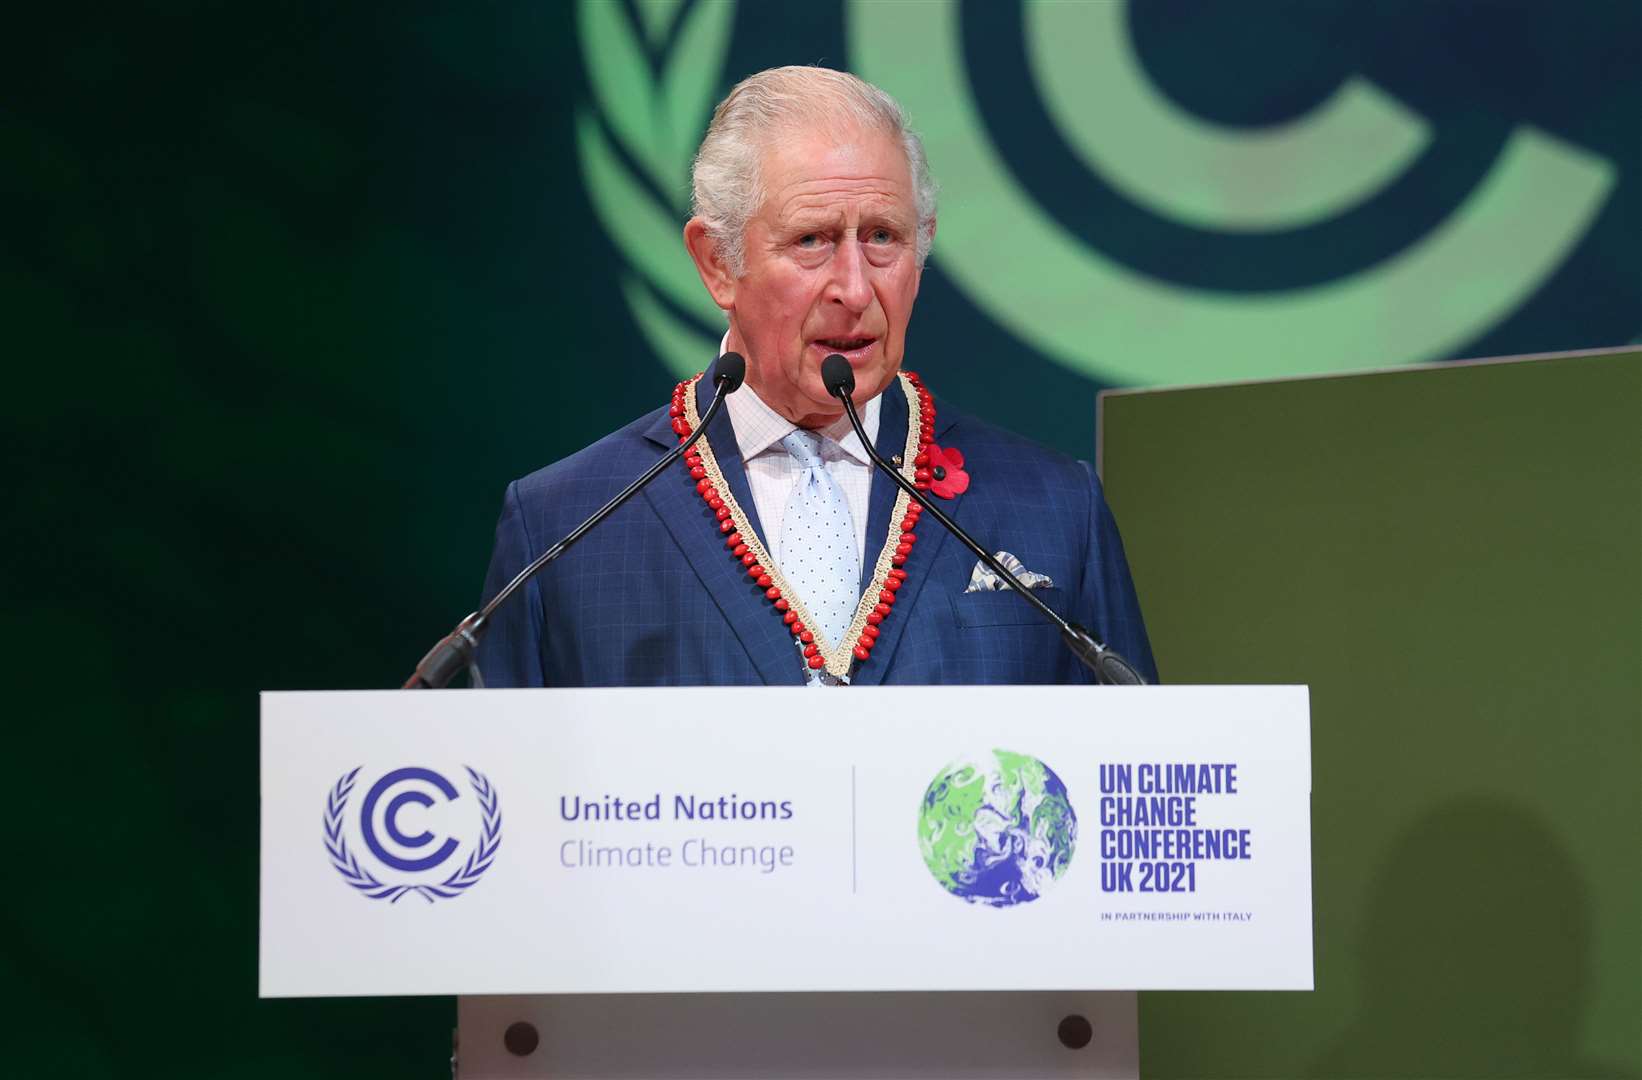 Charles addressing the Cop26 summit in Glasgow (Chris Jackson/PA)